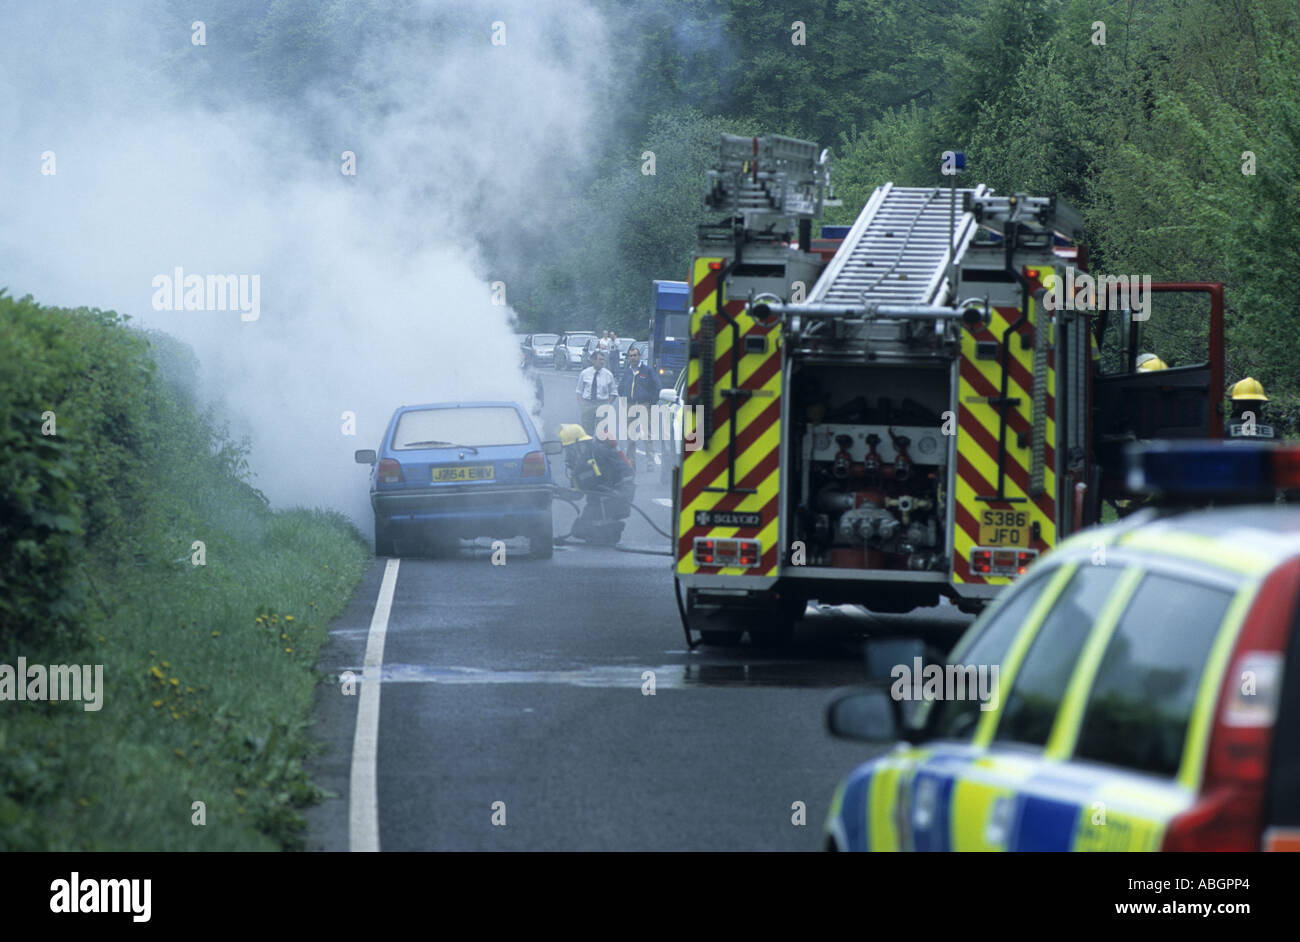 Car fire attended by emergency services on A40 road, Powys, Wales, UK Stock Photo